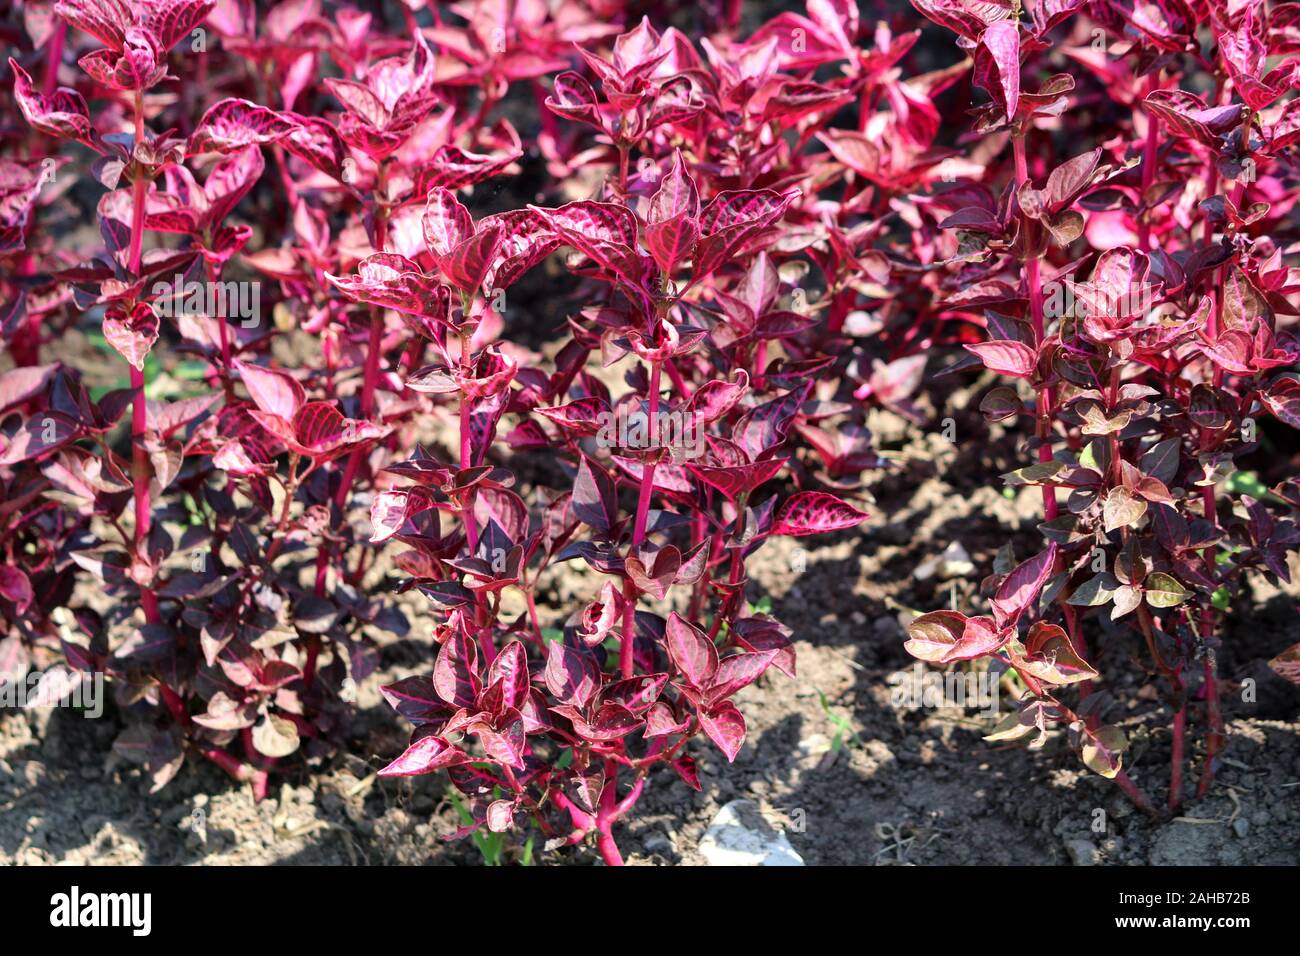 Herbsts bloodleaf or Iresine herbstii or Chicken gizzard or Beefsteak plant or Formosa bloodleaf herbaceous perennial plants with bright red shiny Stock Photo